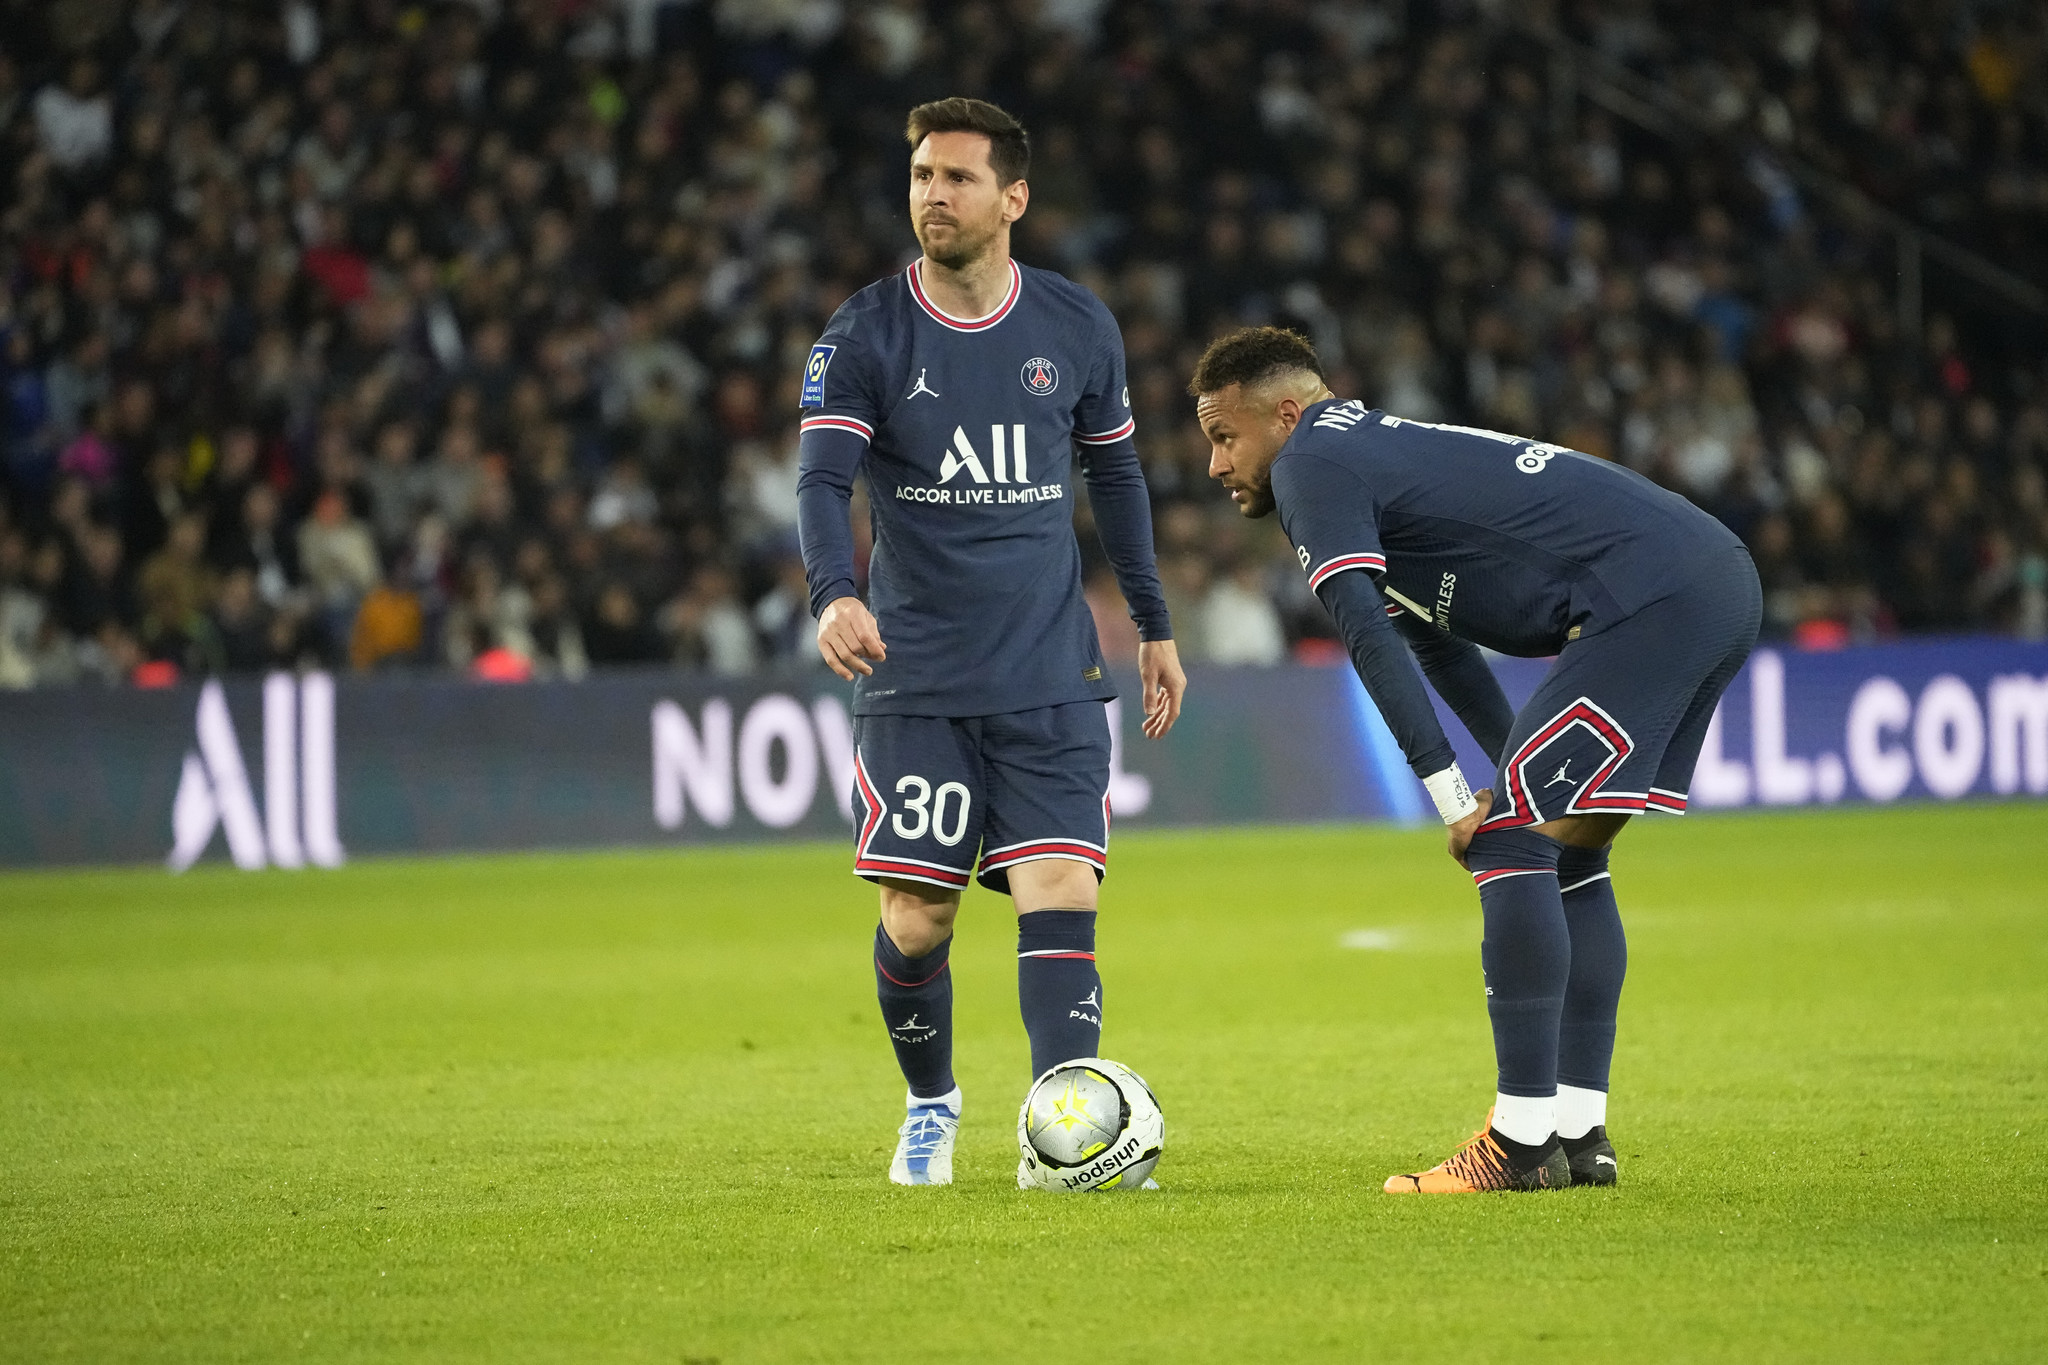 PSG's Lionel Messi, left, and PSG's Neymar prepare to shot a free kick.